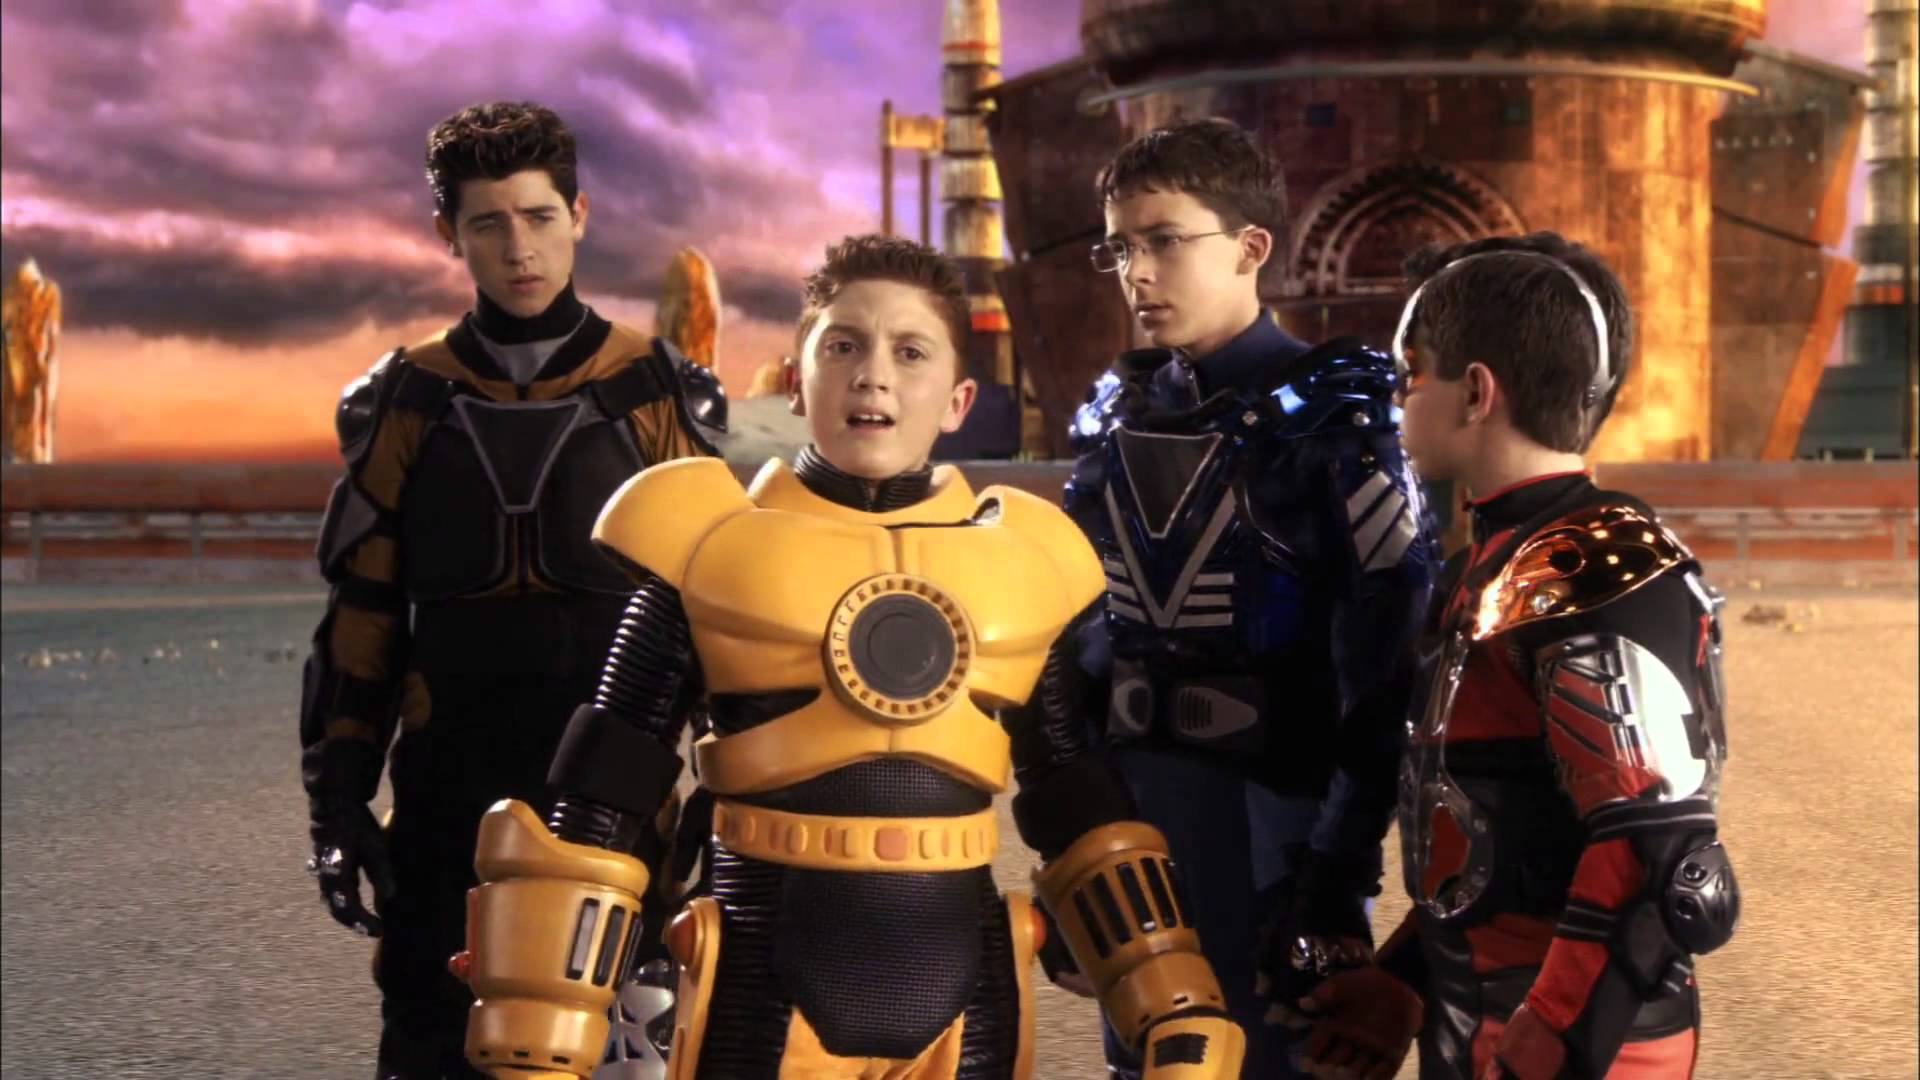 1920x1080 > Spy Kids 3-D: Game Over Wallpapers